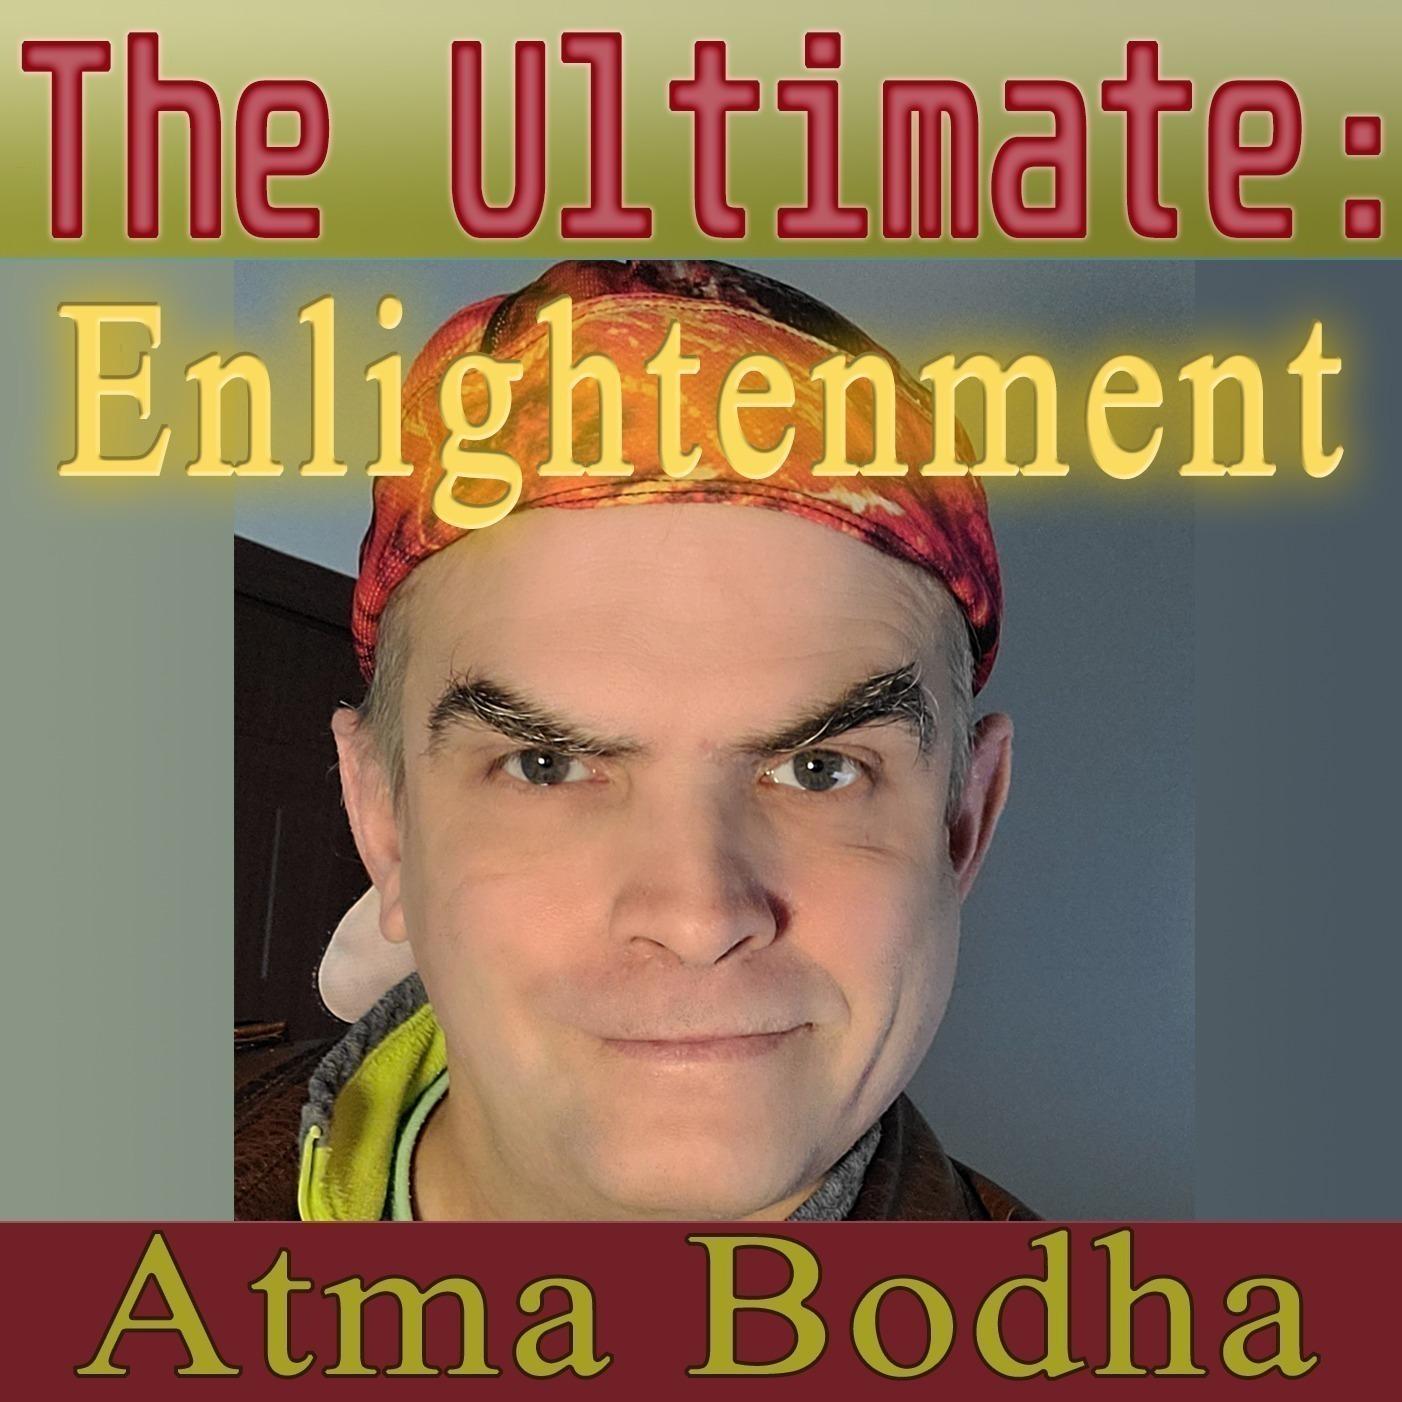 The Ultimate: Enlightenment with Atma Bodha